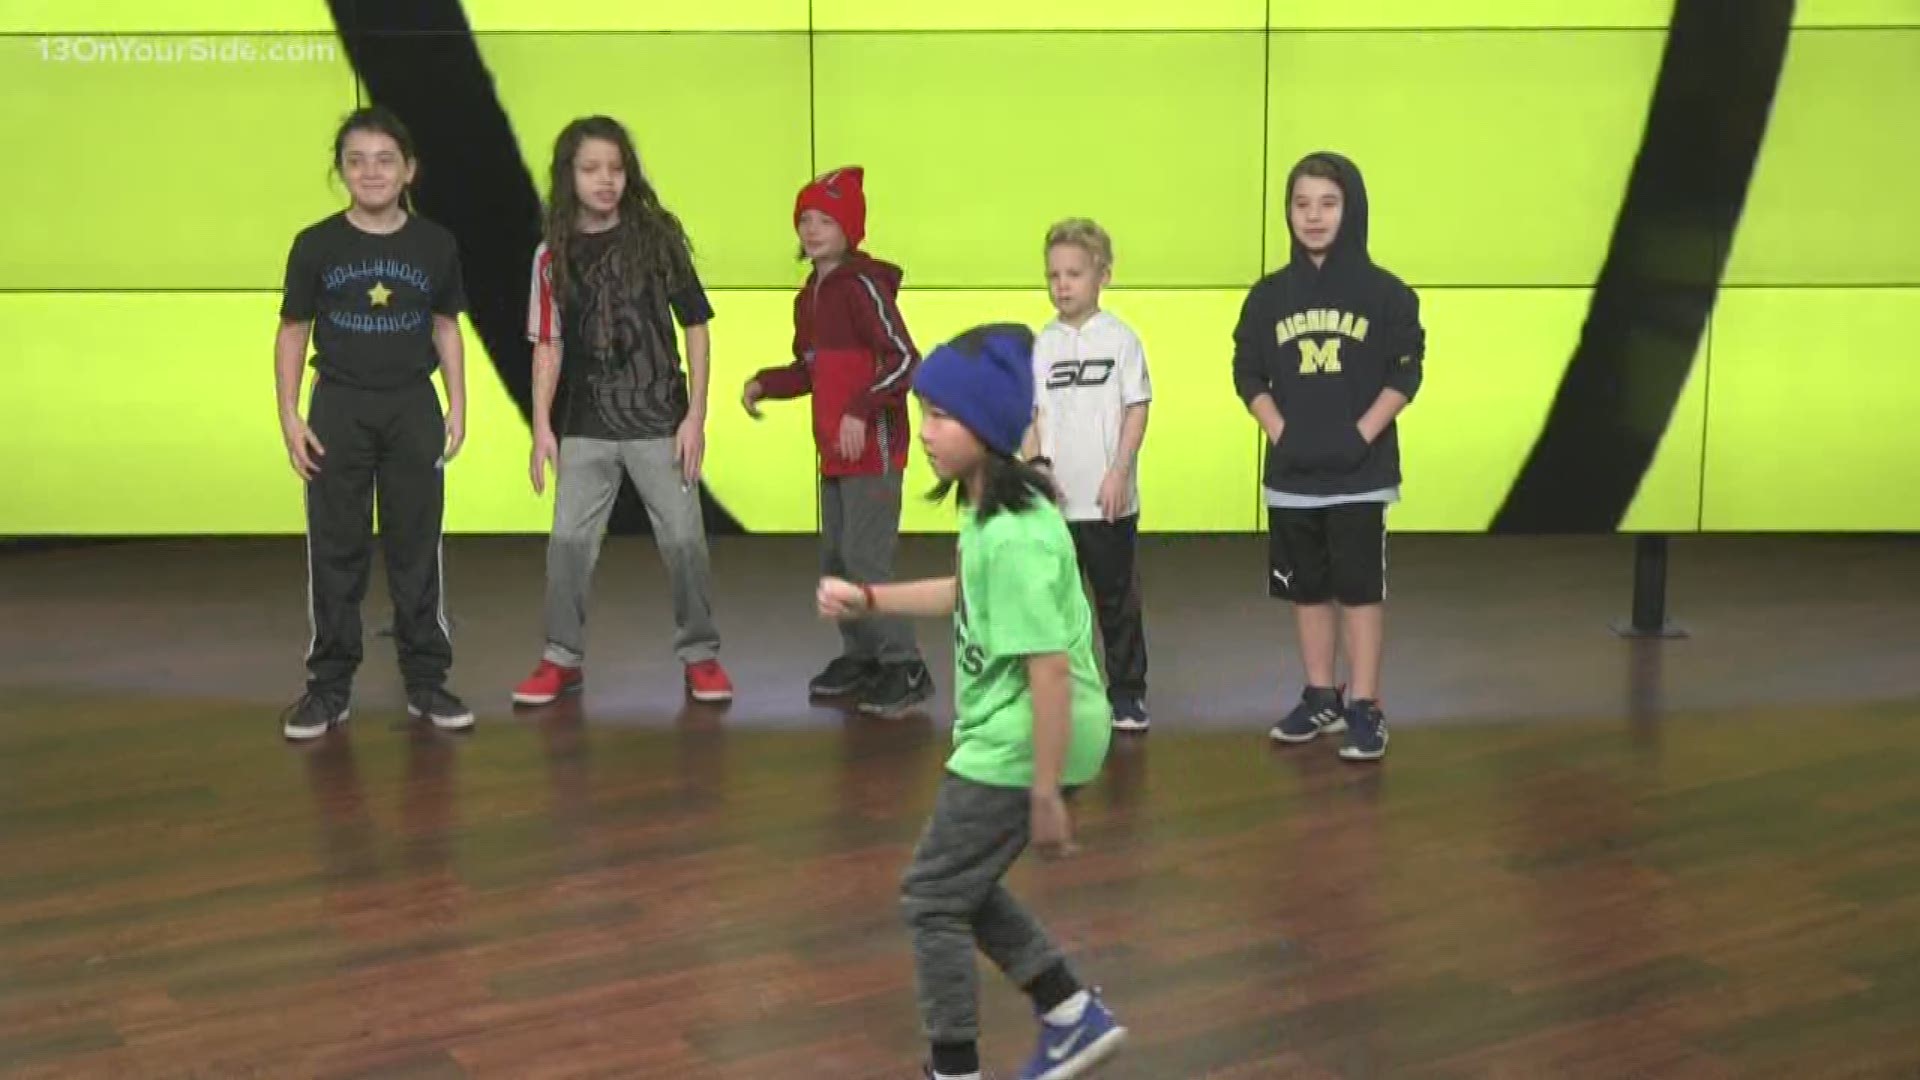 One of the event's happening this weekend for Laughfest that is kids friendly is the Kids Rock Hip Hop Dance Party.